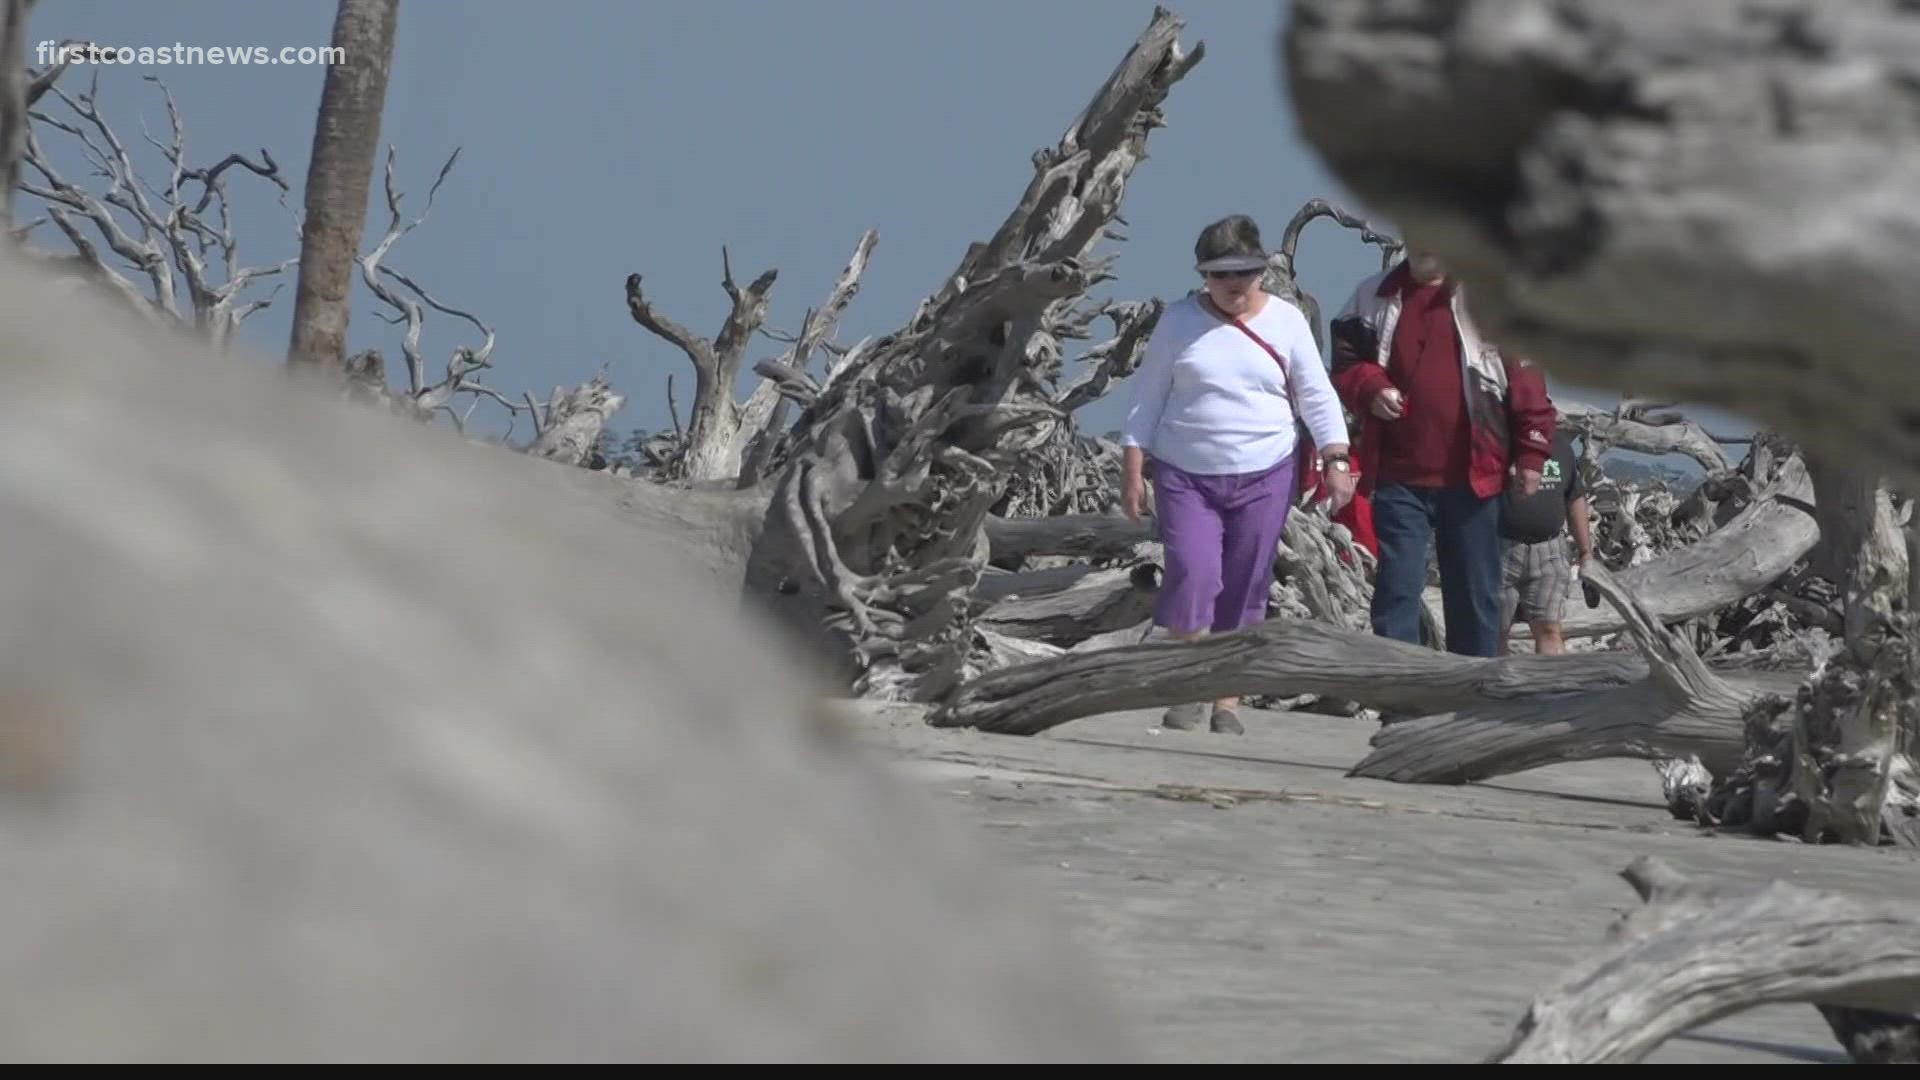 Jekyll Island is celebrating 75 years as a state park which opened up some of the most beautiful parts of the Georgia coast to the public.